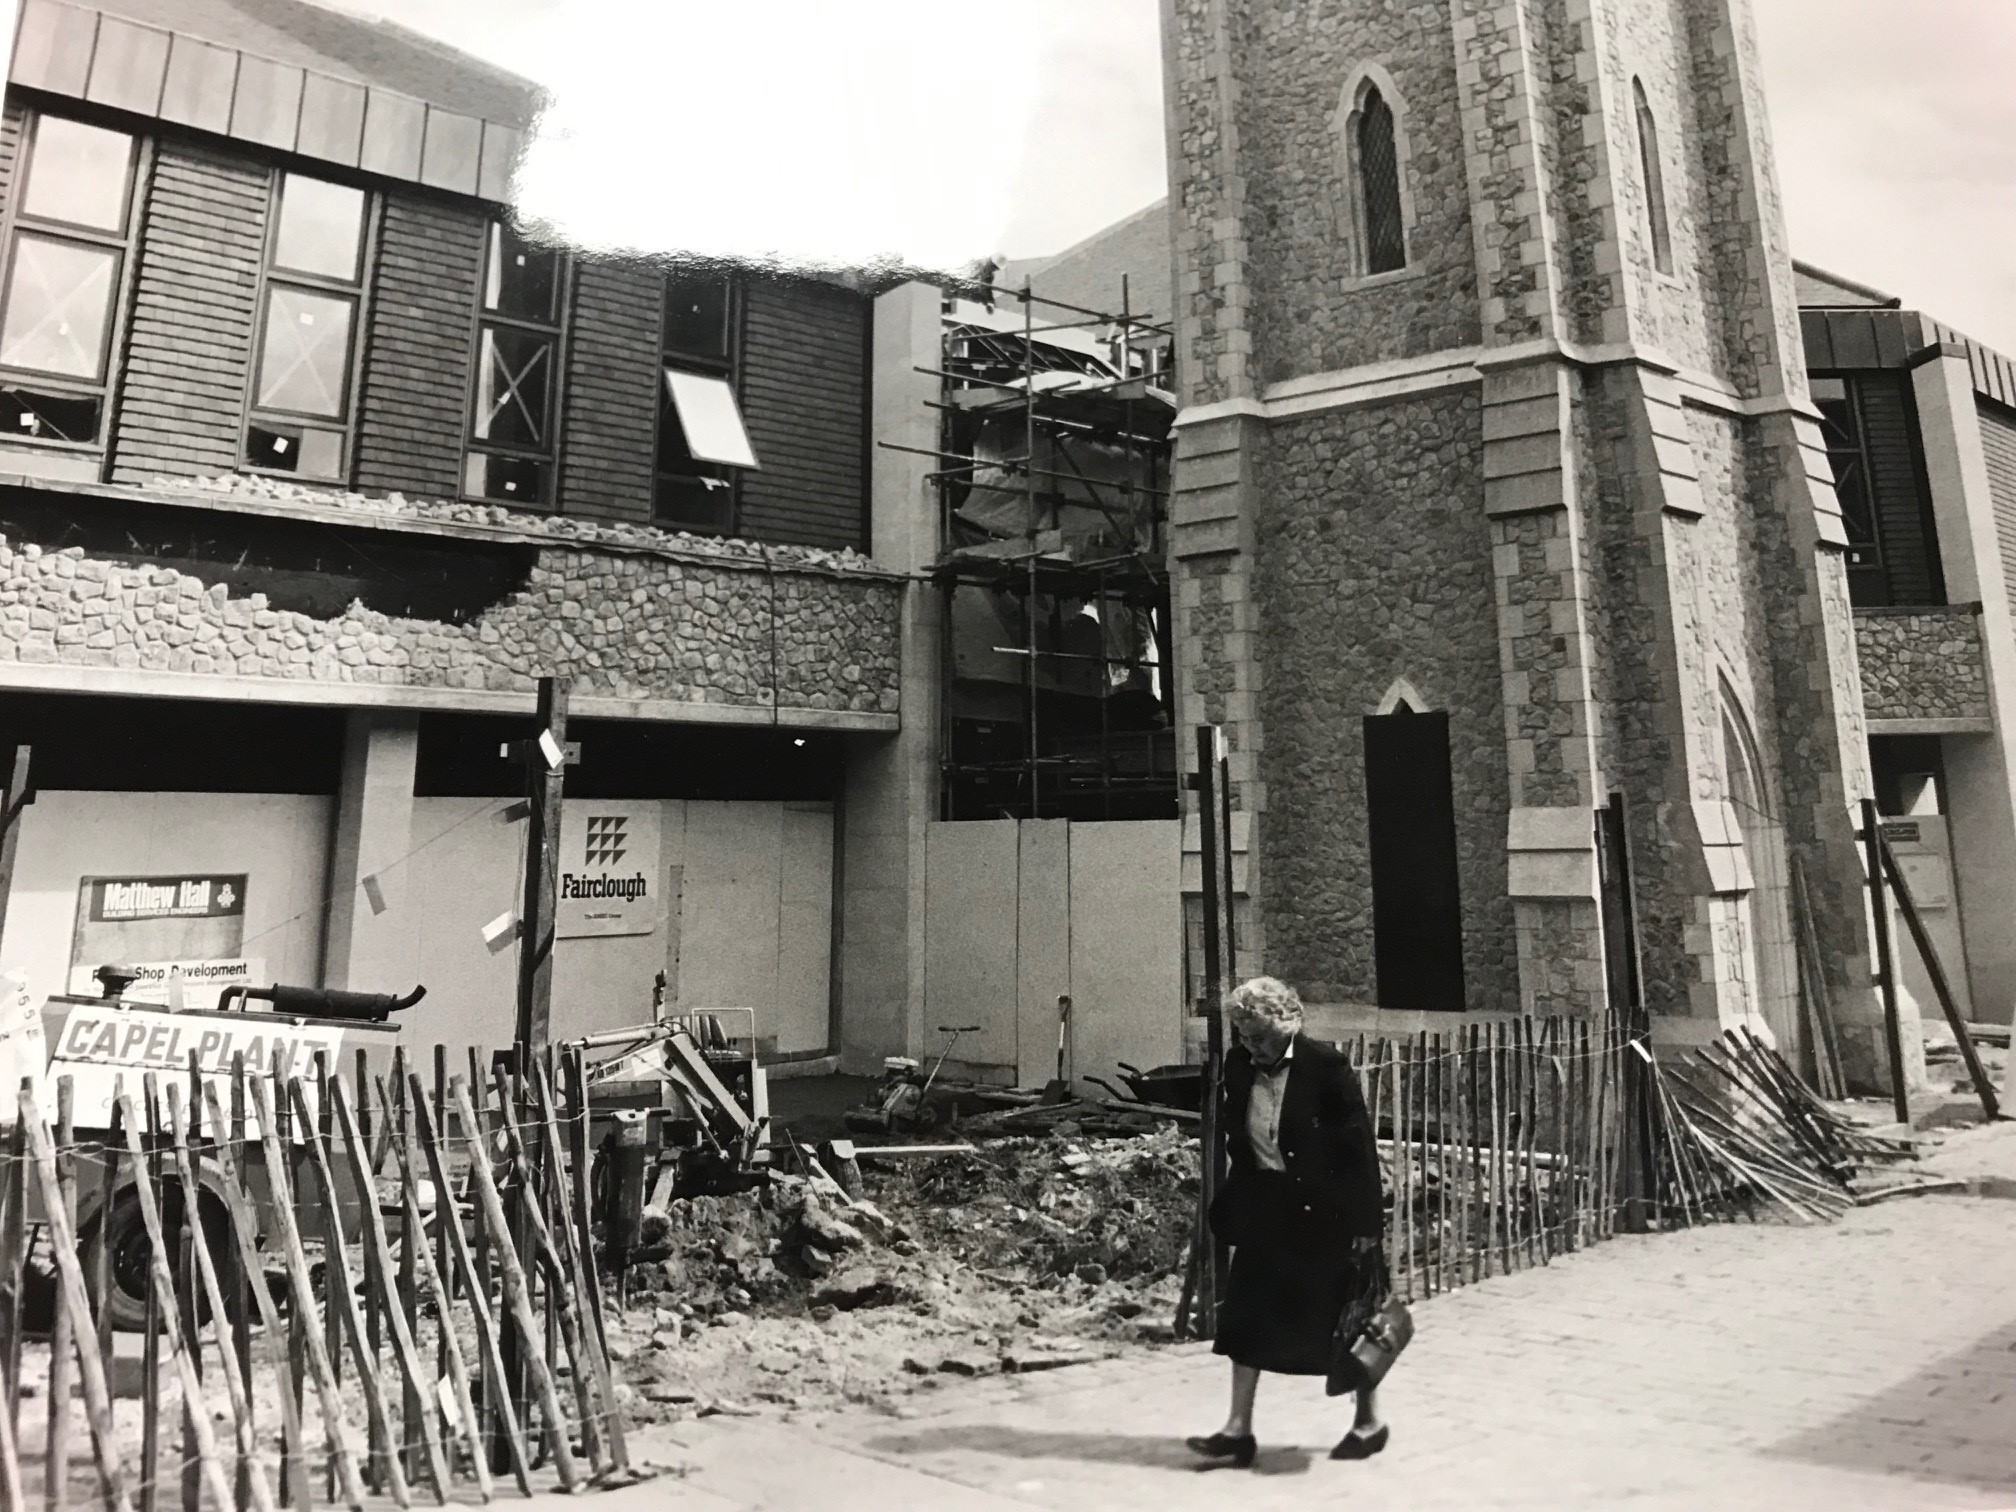 Building work underway at Lion Walk back in the 1980s